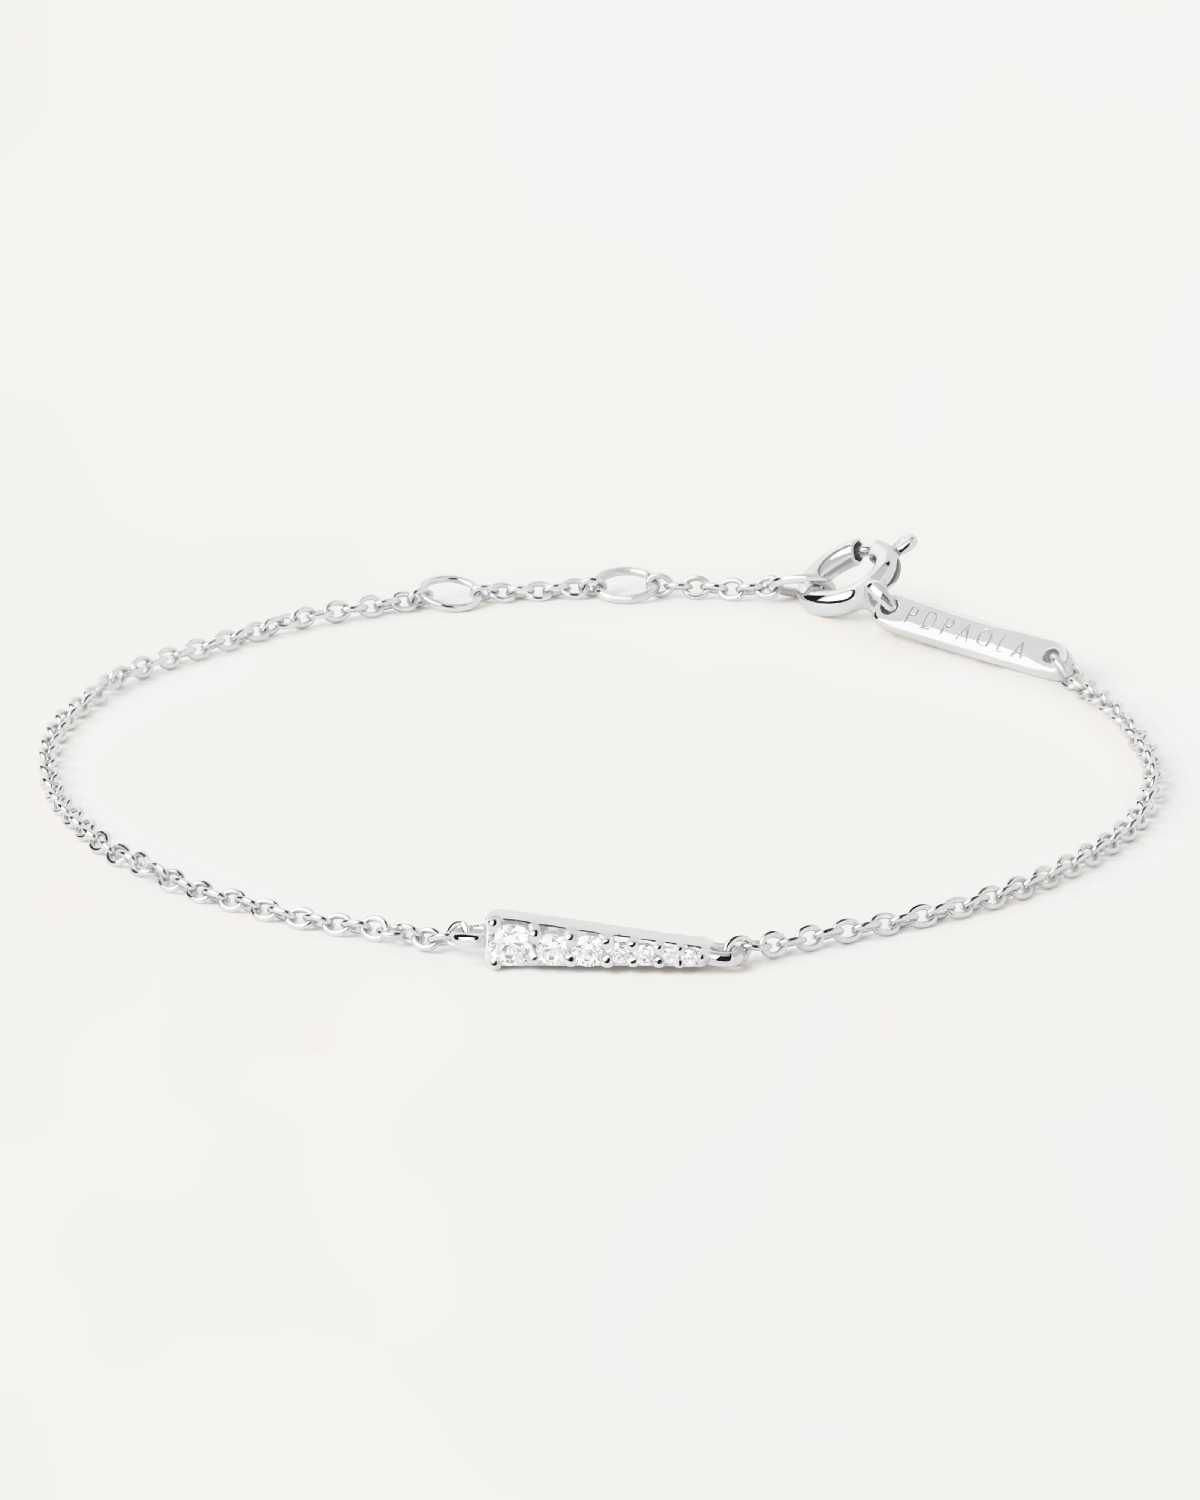 2023 Selection | Peak Silver Bracelet. 925 silver bracelet with white zirconia motive in tip shape. Get the latest arrival from PDPAOLA. Place your order safely and get this Best Seller. Free Shipping.